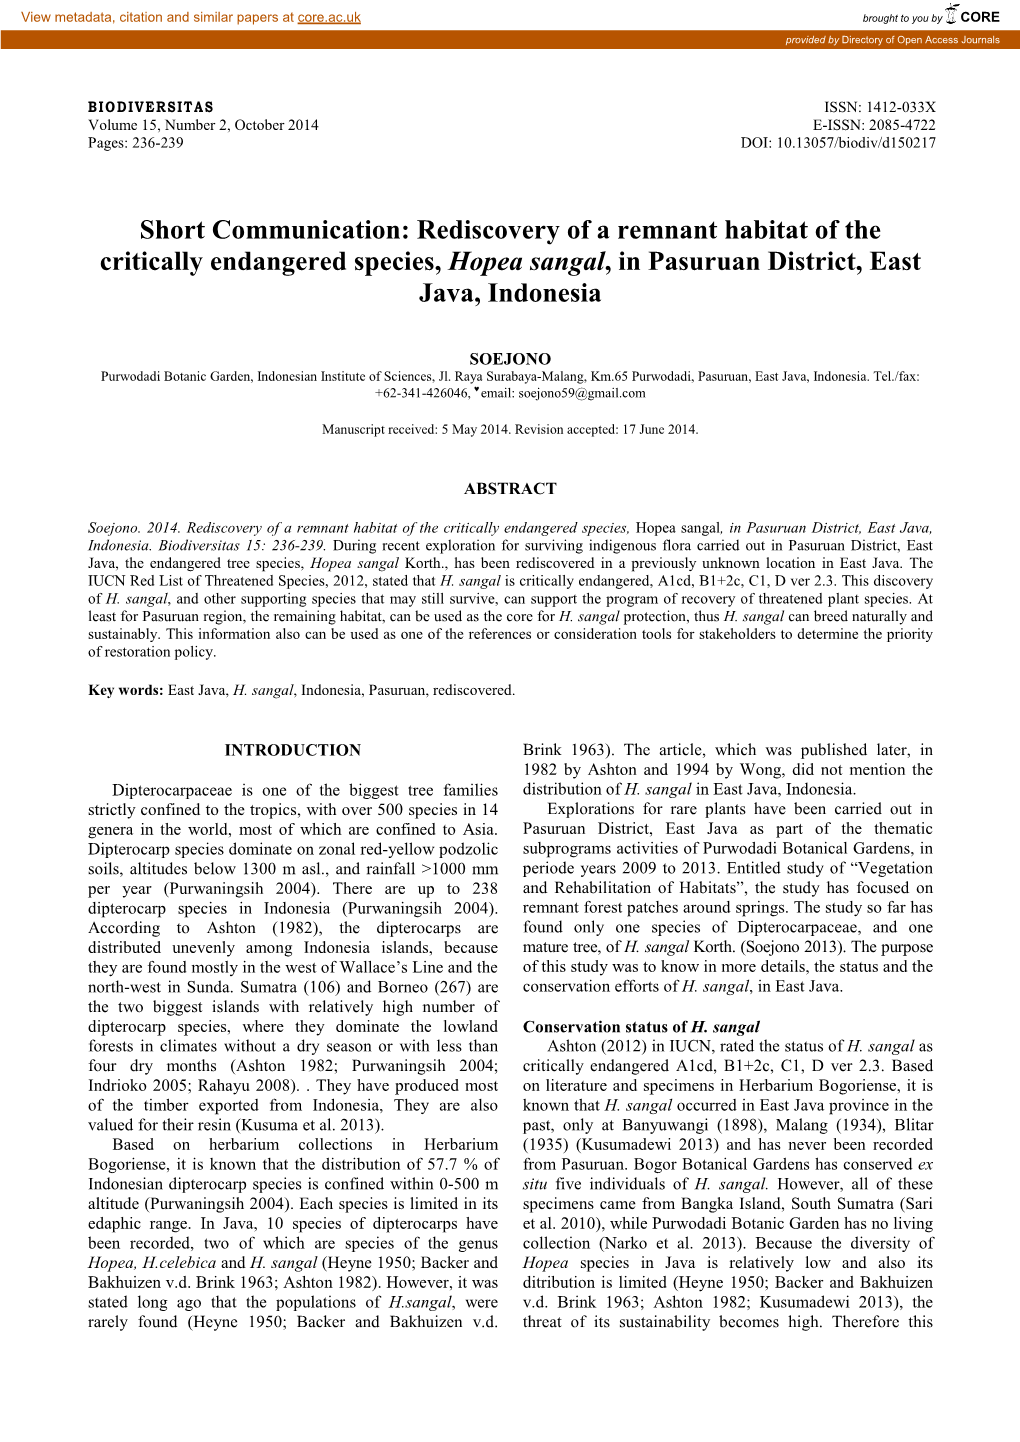 Rediscovery of a Remnant Habitat of the Critically Endangered Species, Hopea Sangal, in Pasuruan District, East Java, Indonesia